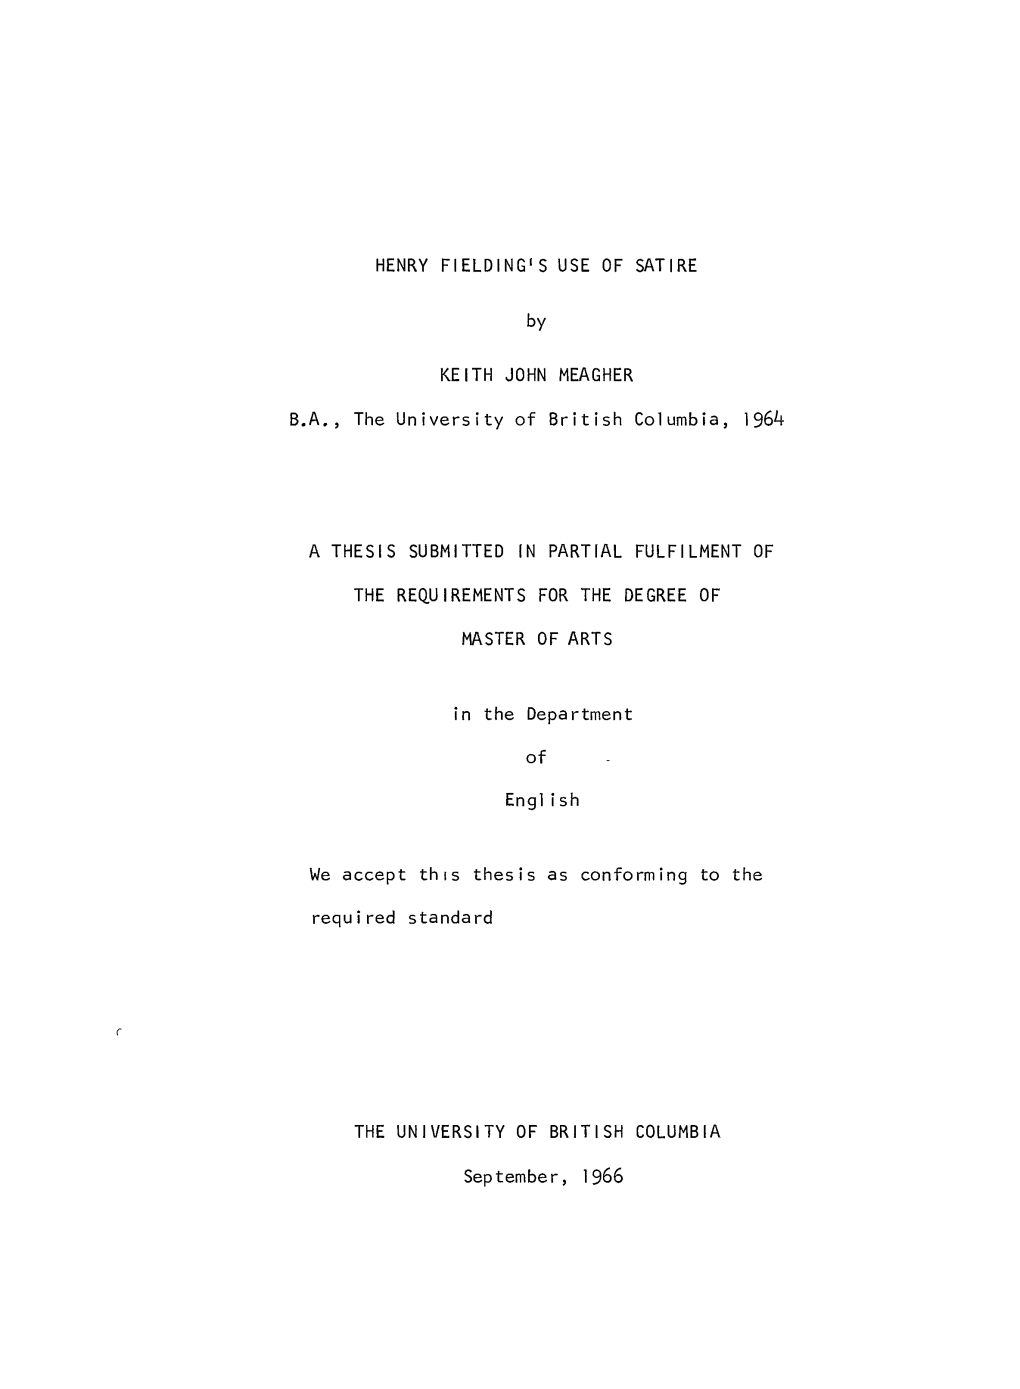 HENRY FIELDING's USE of SATIRE by KEITH JOHN MEAGHER B.A., the University of British Columbia, 1964 a THESIS SUBMITTED in PARTIA